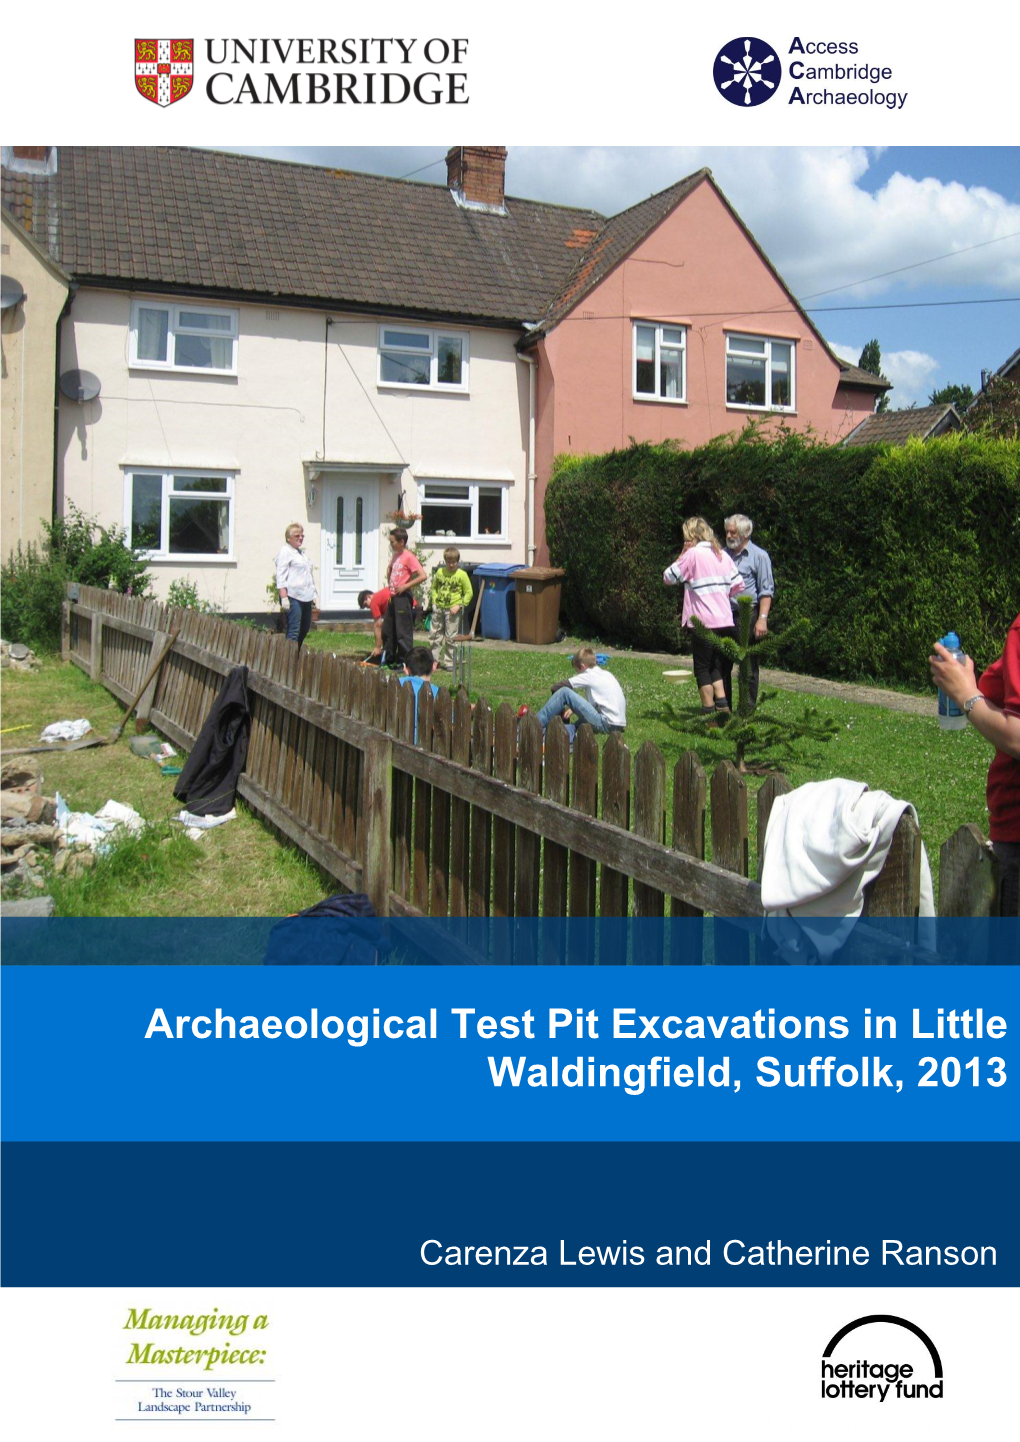 Archaeological Test Pit Excavations in Little Waldingfield, Suffolk, 2013